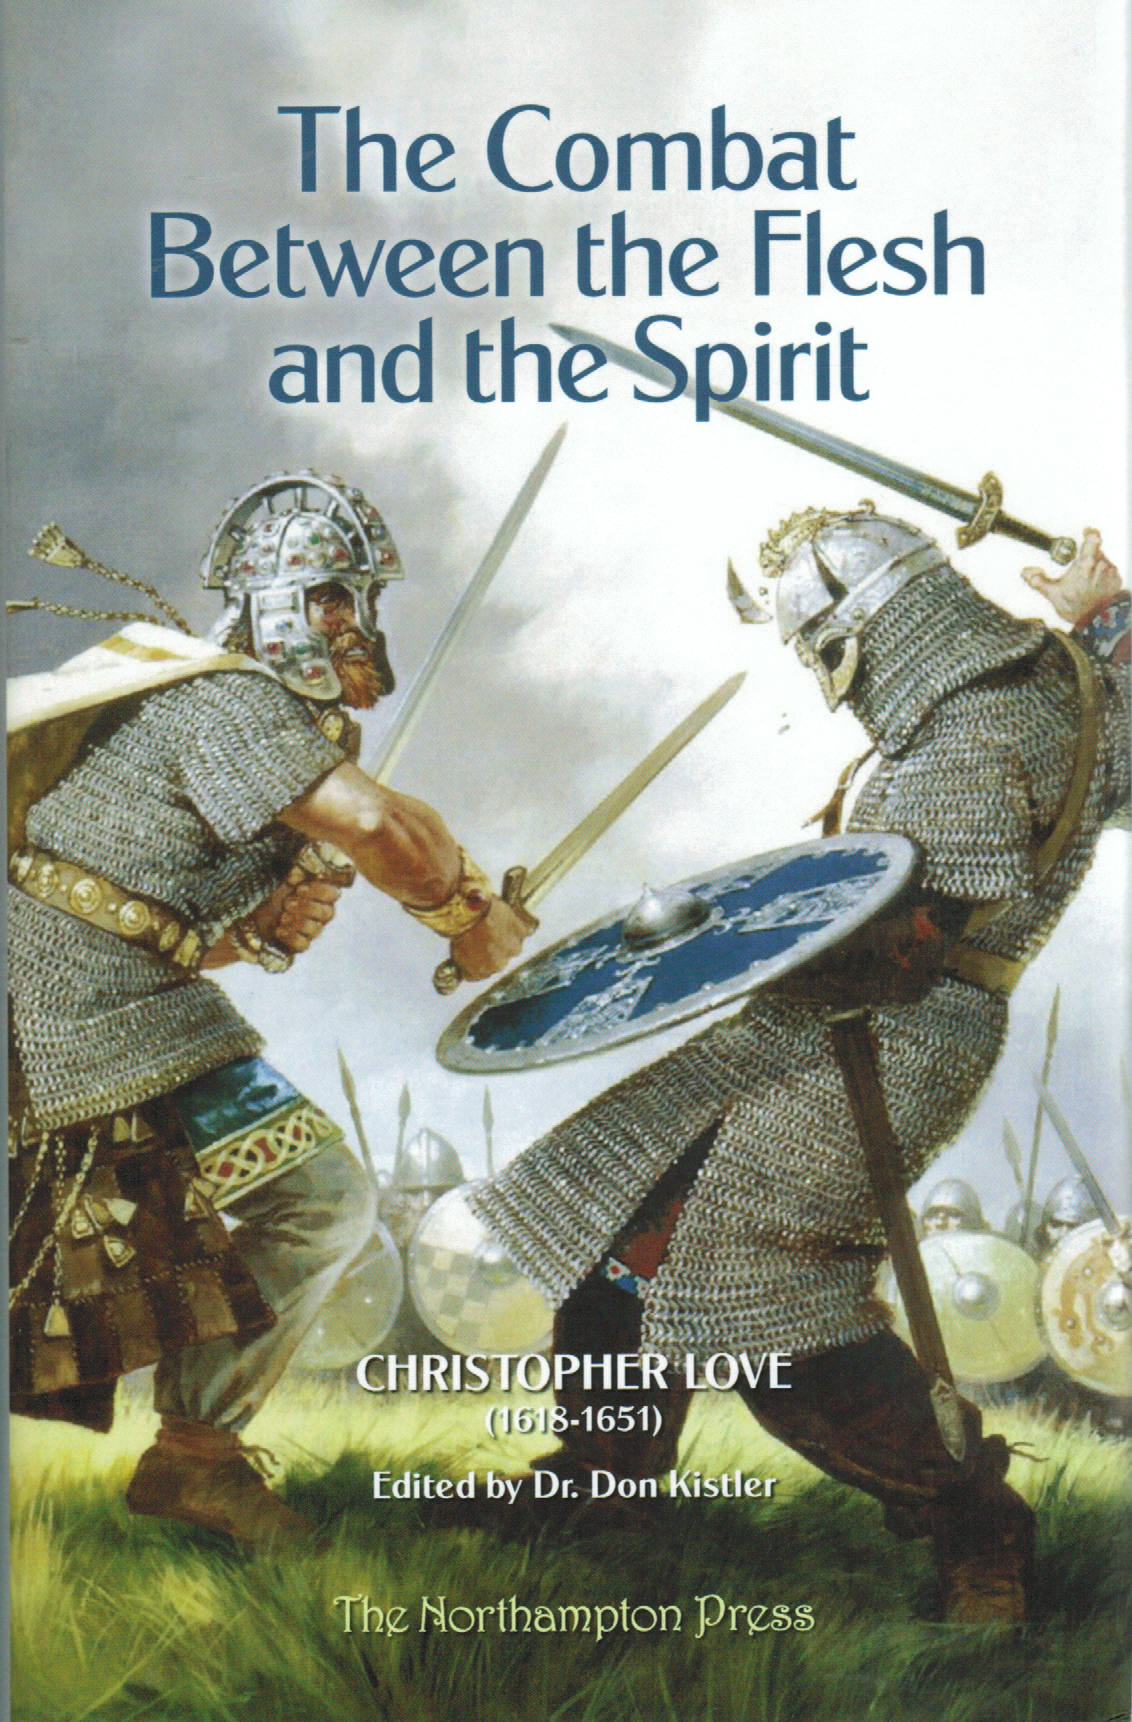 The Combat Between the Flesh and the Spirit